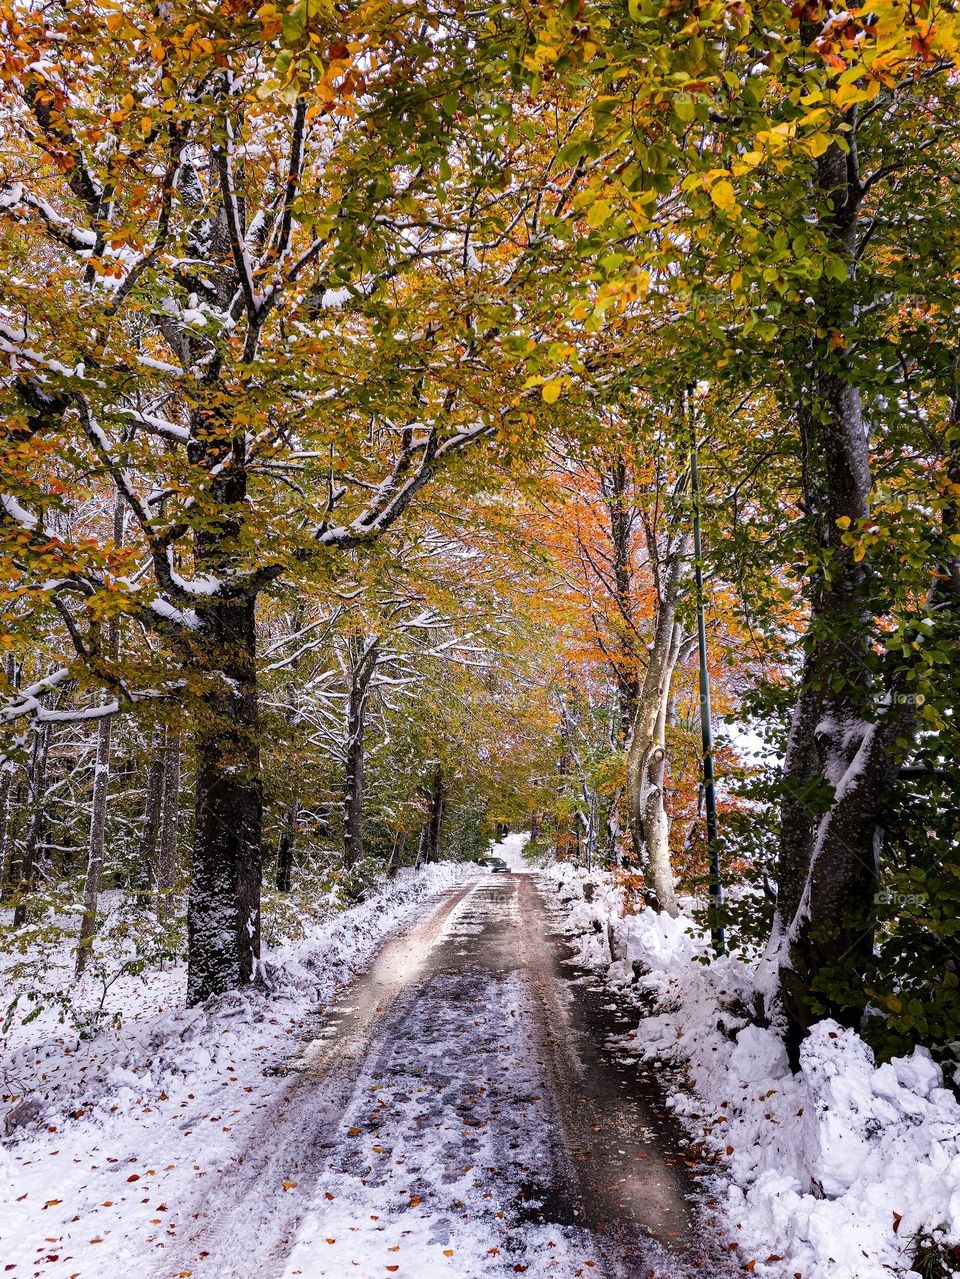 Powerfull forest ,colorful and snow at the same time . Welcome November